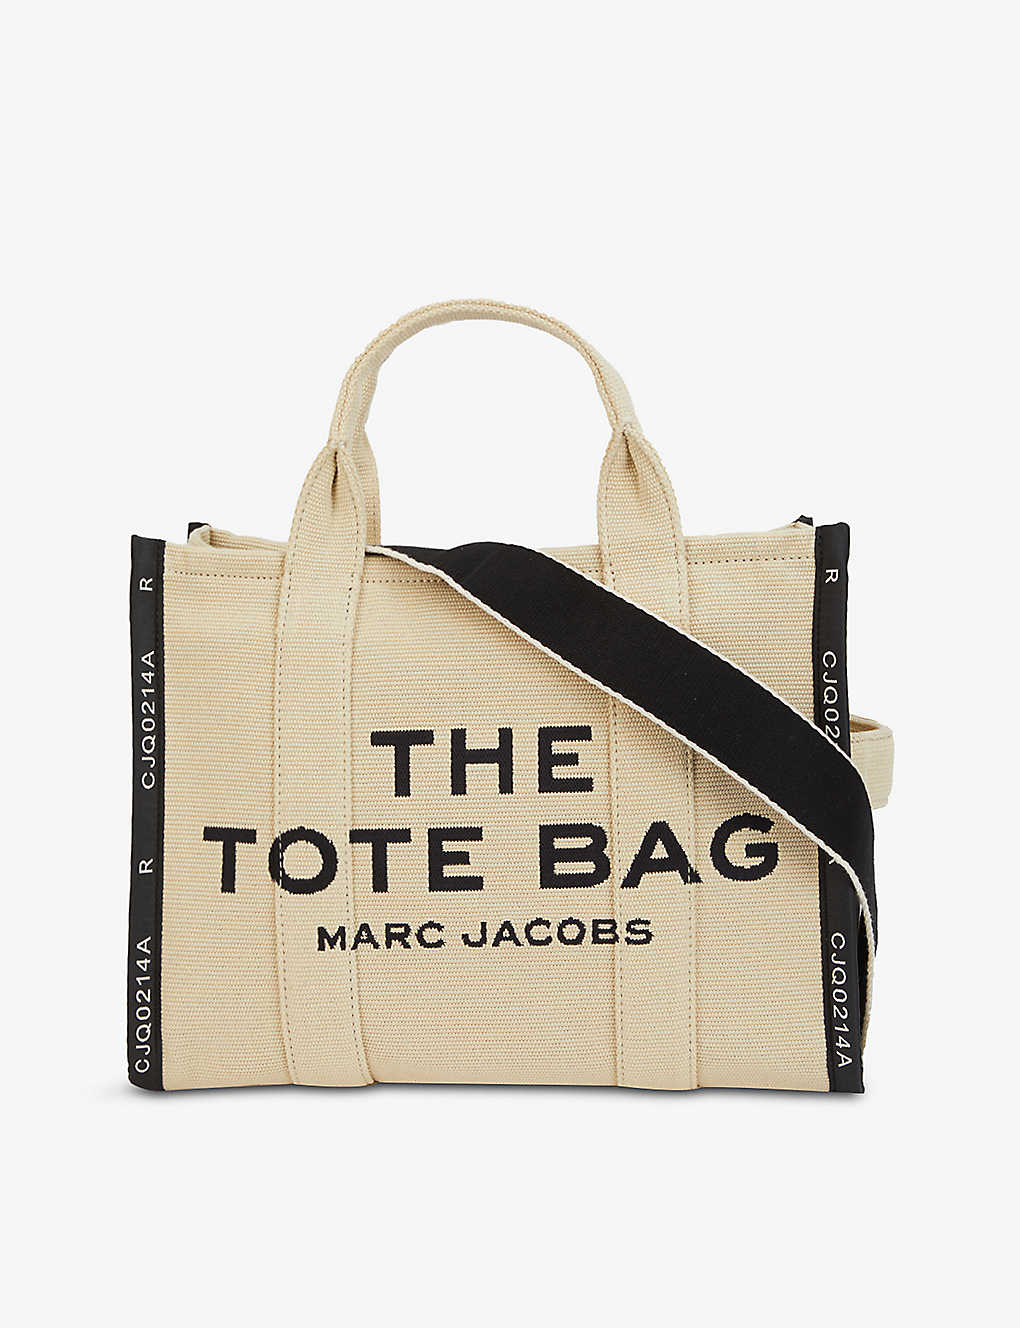 MARC JACOBS
The Medium Tote cotton-canvas tote bag
